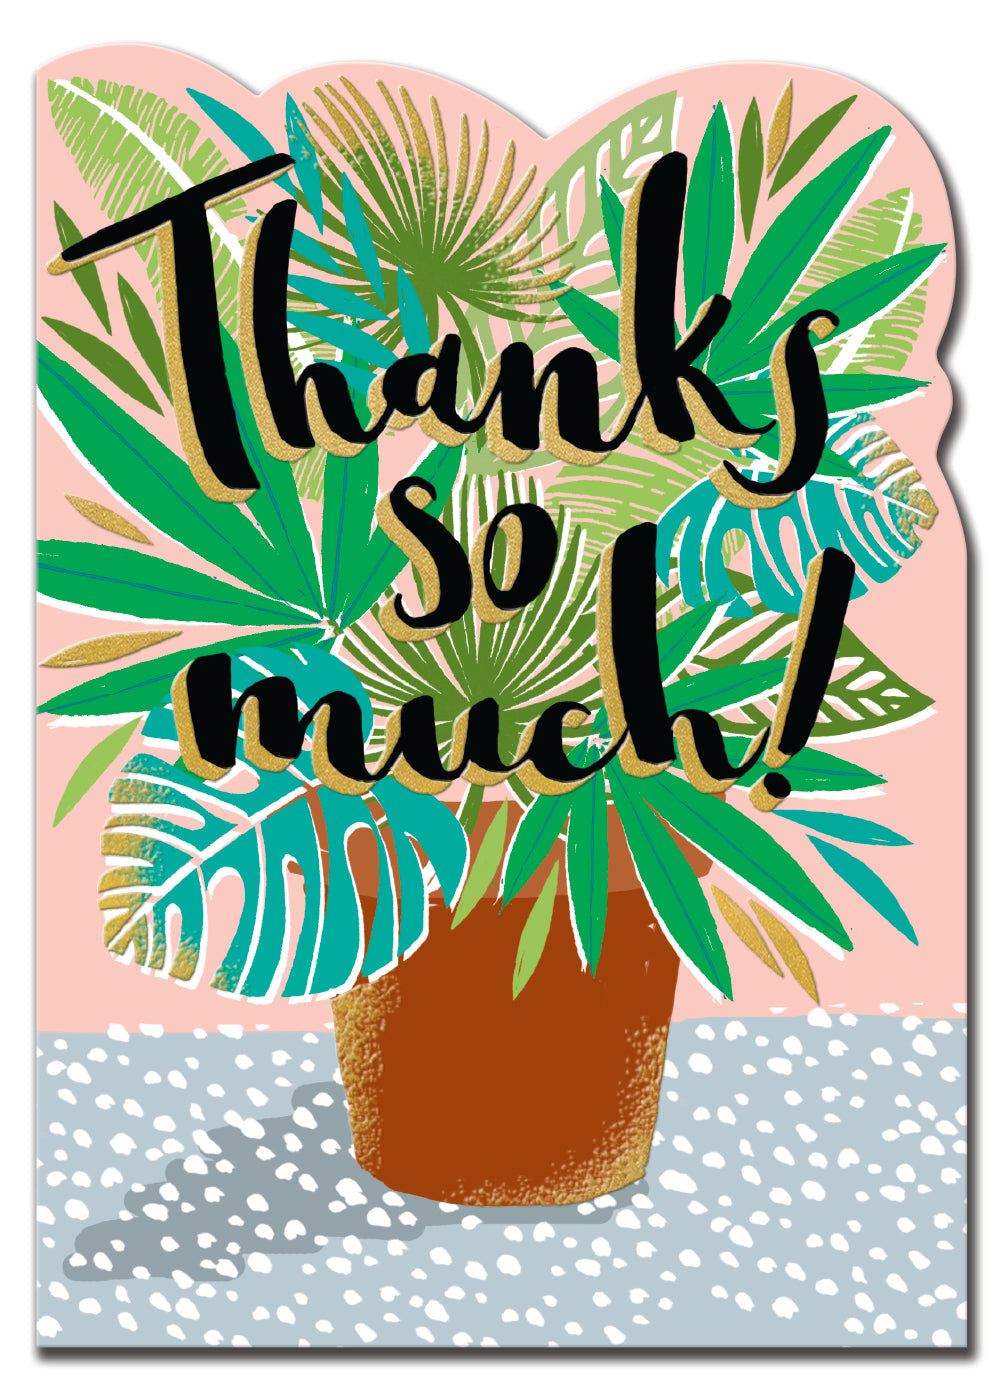 Thanks So Much Tropical Plant Pot Cut-out Card from Penny Black